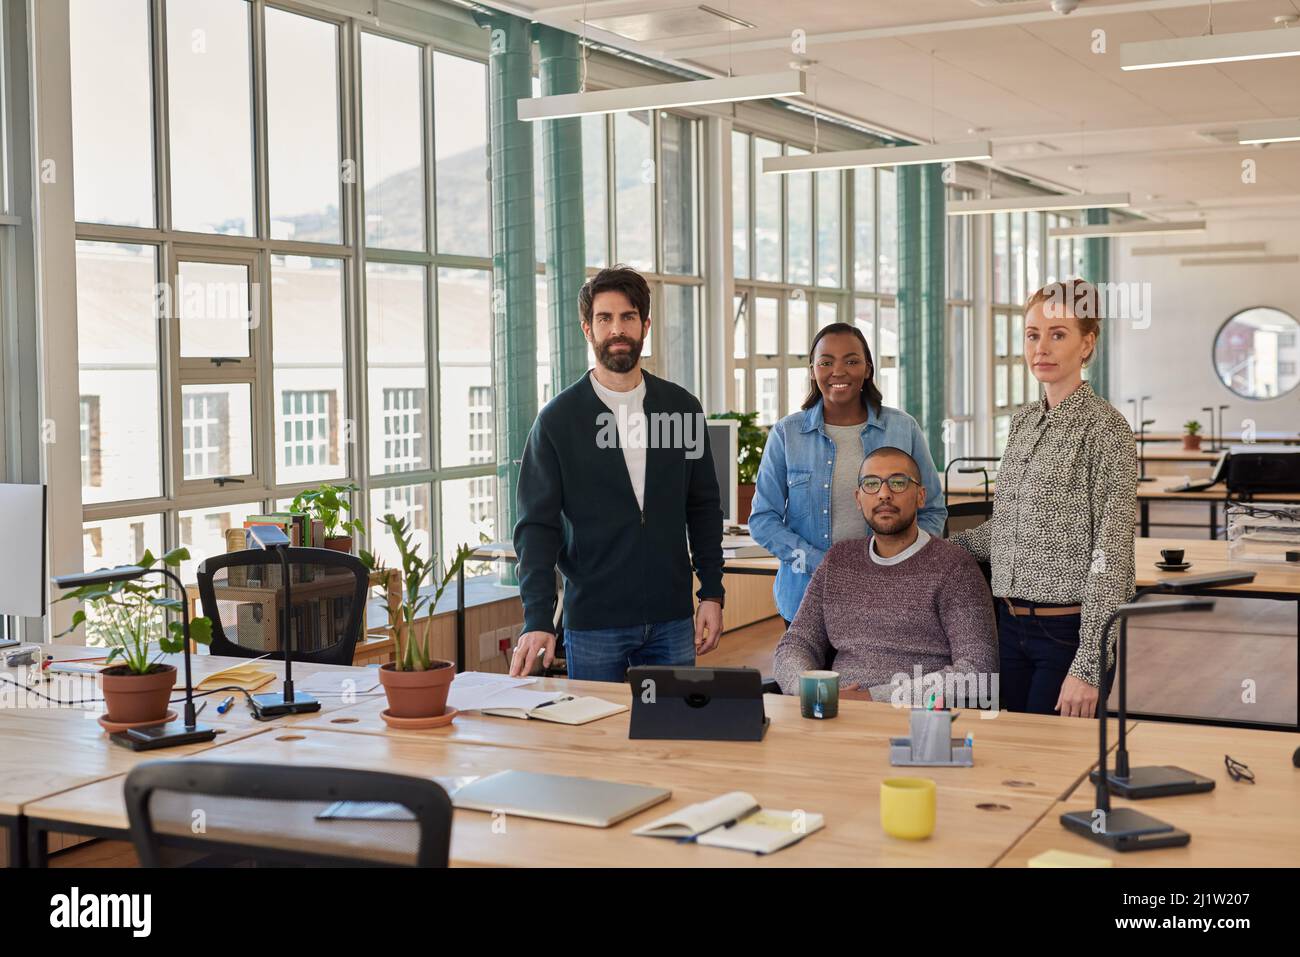 Confident group of young businesspeople working together in an office Stock Photo